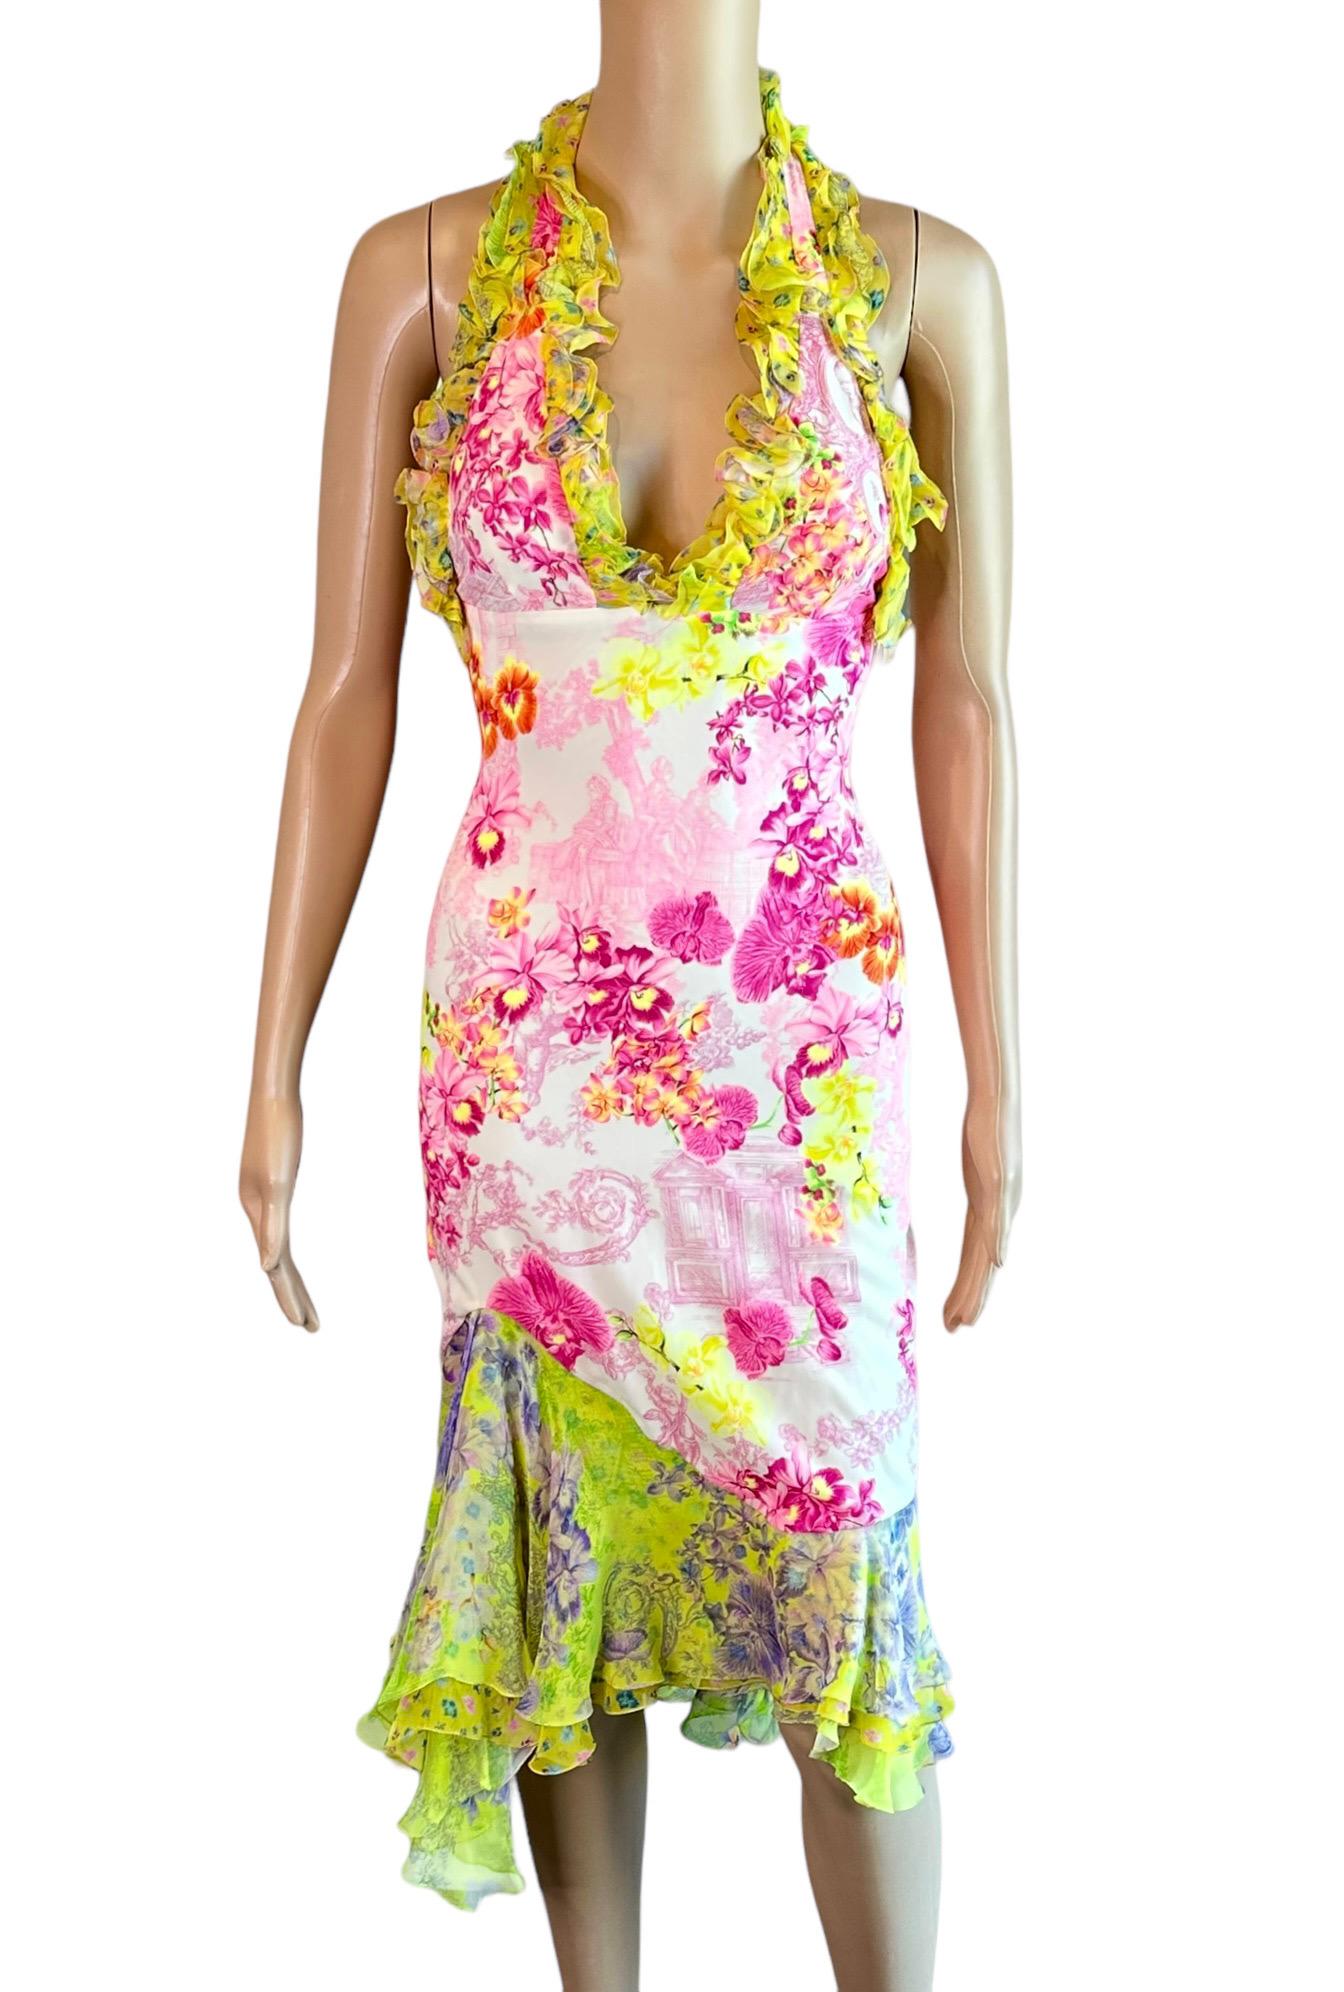 Versace S/S 2004 Runway Floral Print Ruffle Plunging Neckline Low Back Dress 3